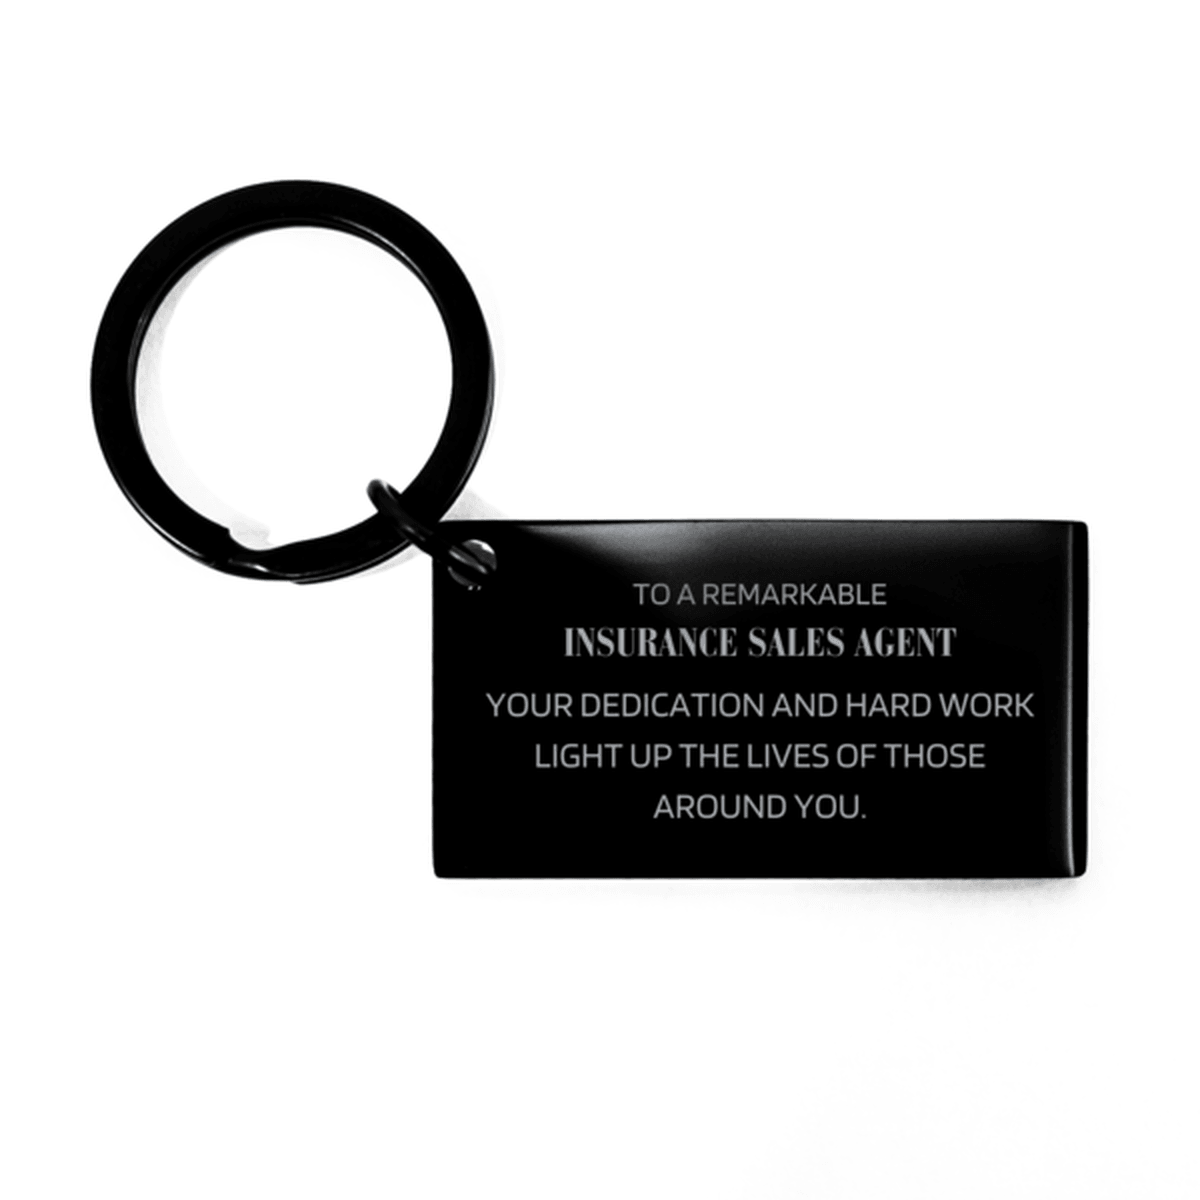 Remarkable Insurance Sales Agent Gifts, Your dedication and hard work, Inspirational Birthday Christmas Unique Keychain For Insurance Sales Agent, Coworkers, Men, Women, Friends - Mallard Moon Gift Shop